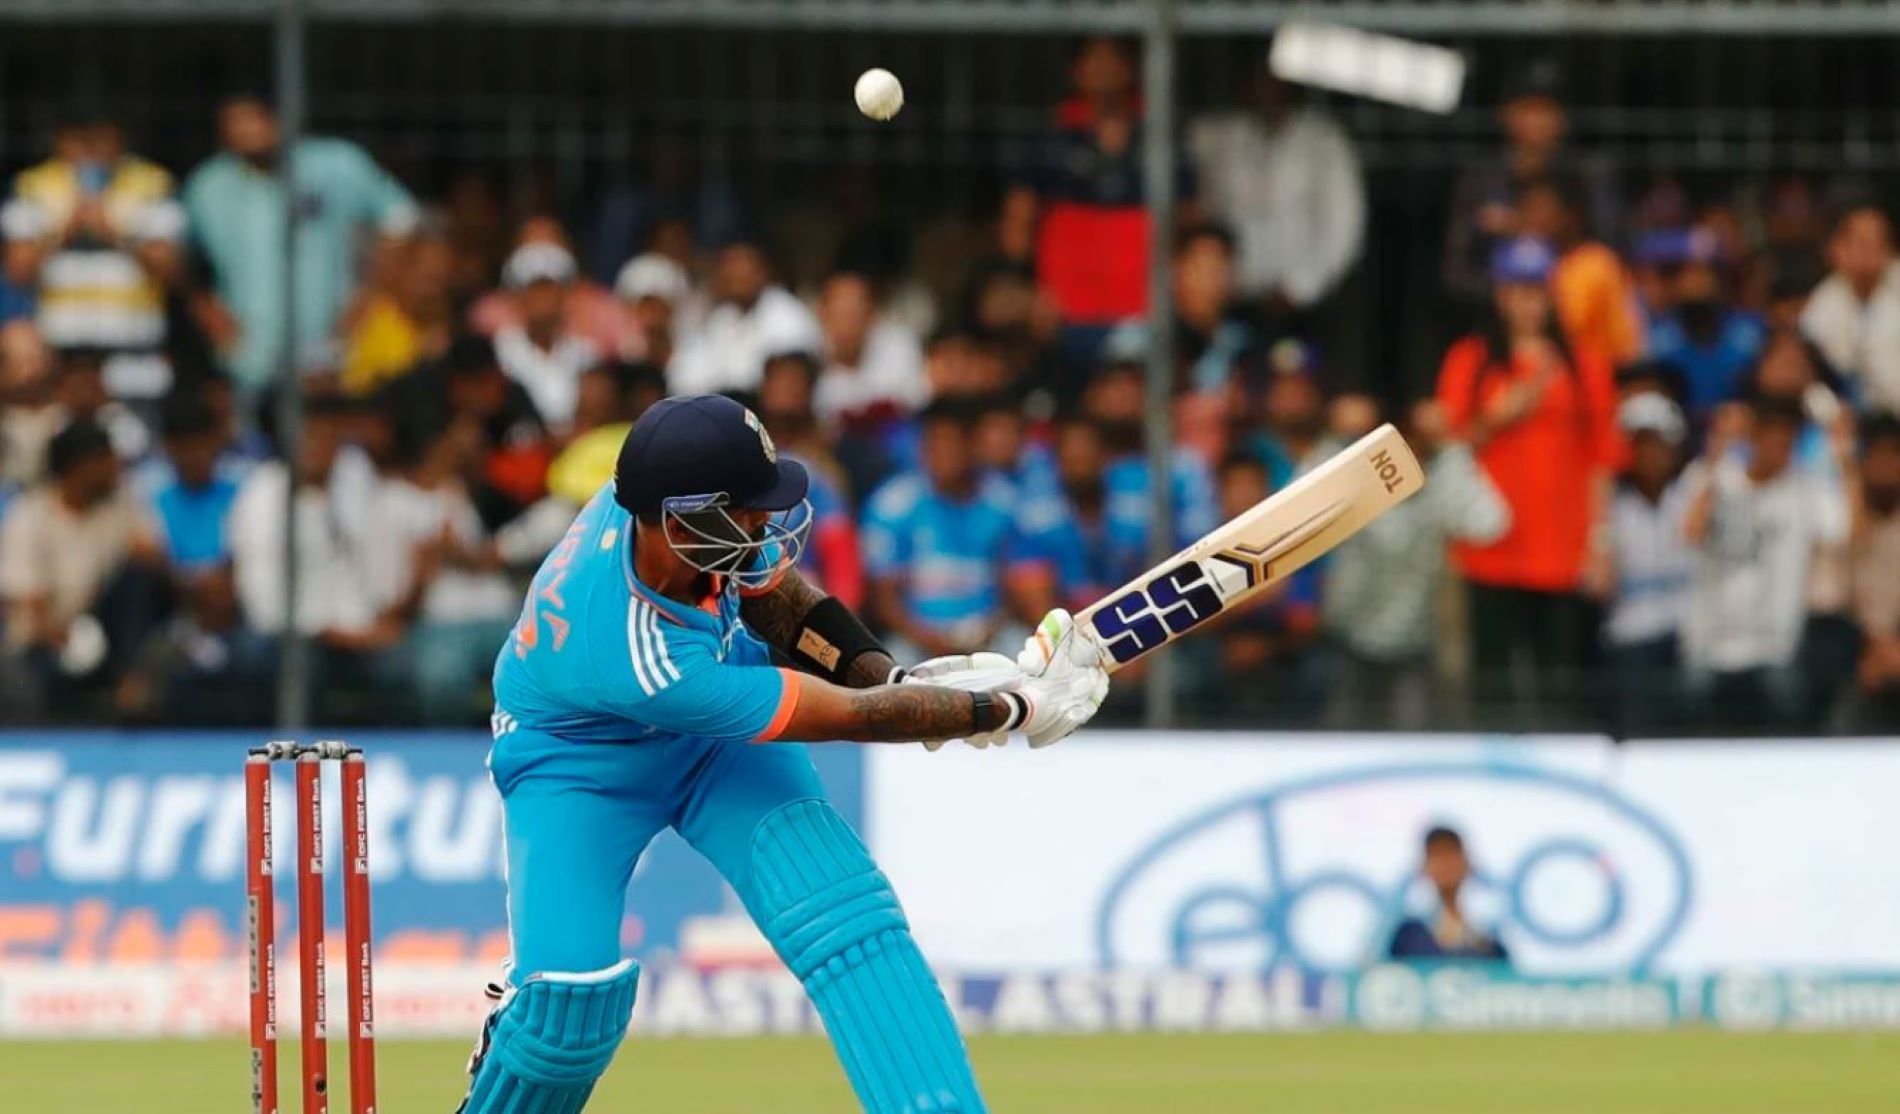 Surya repaid the selector&#039;s trust with two contrasting knocks as the finisher.